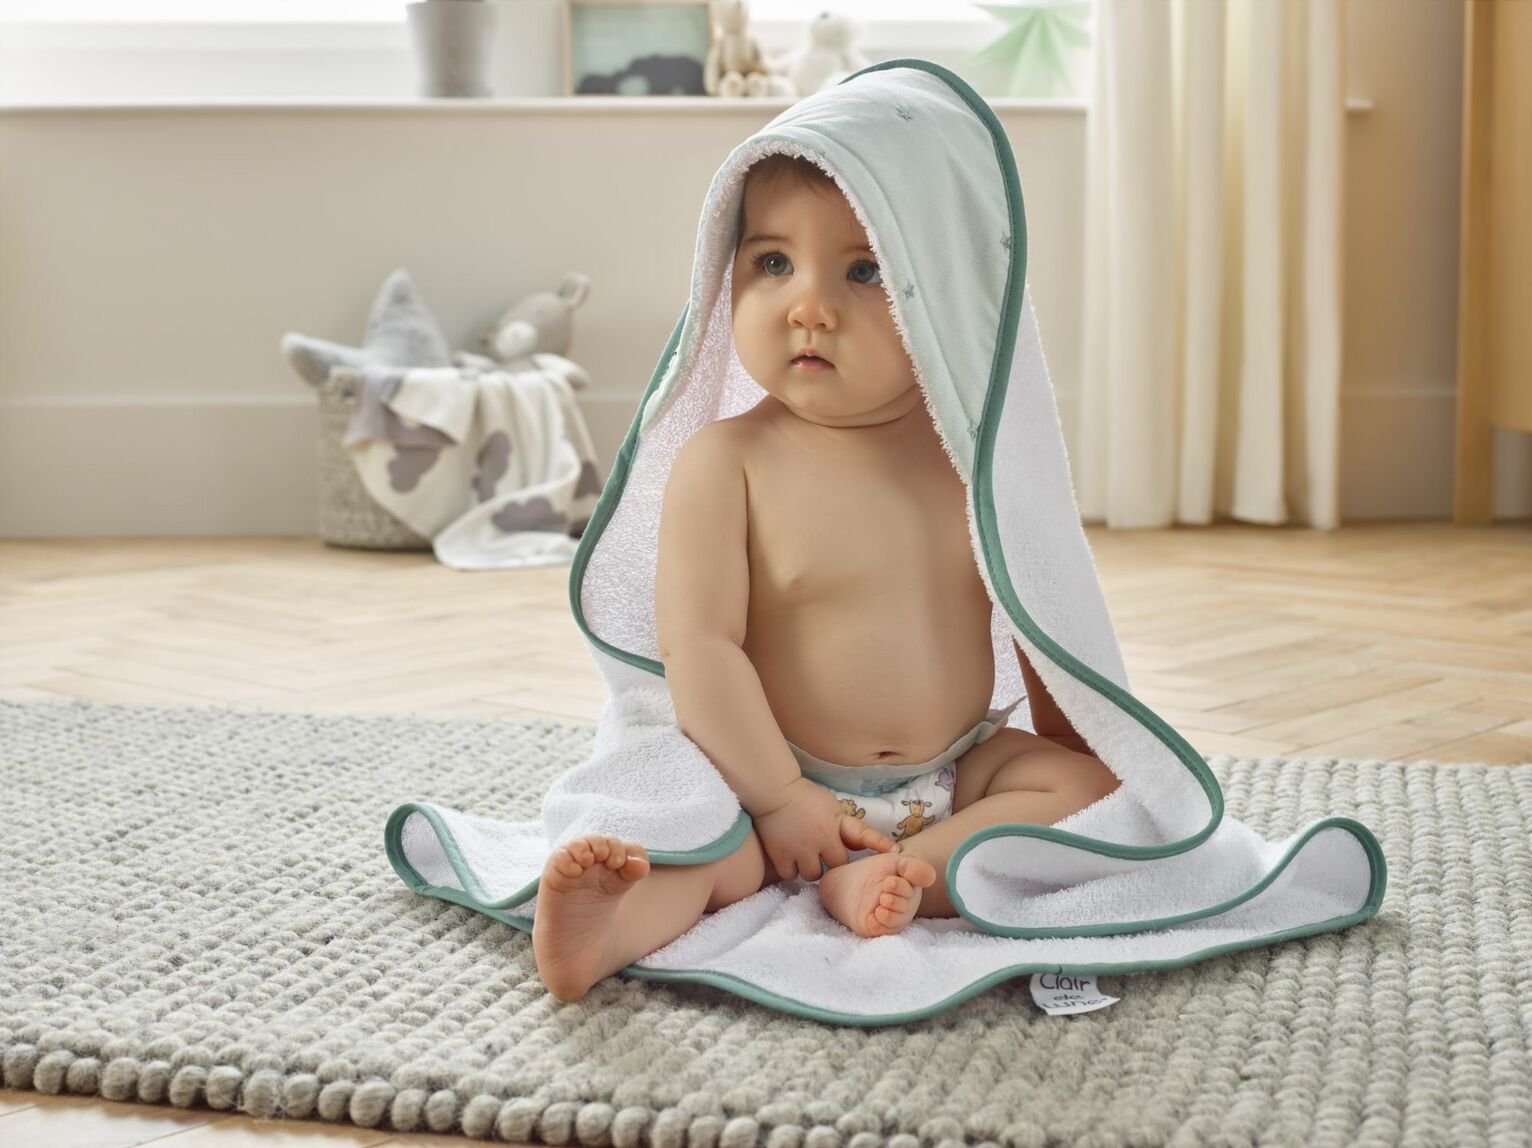 Clair de Lune Lullaby Baby Hooded Towel Review